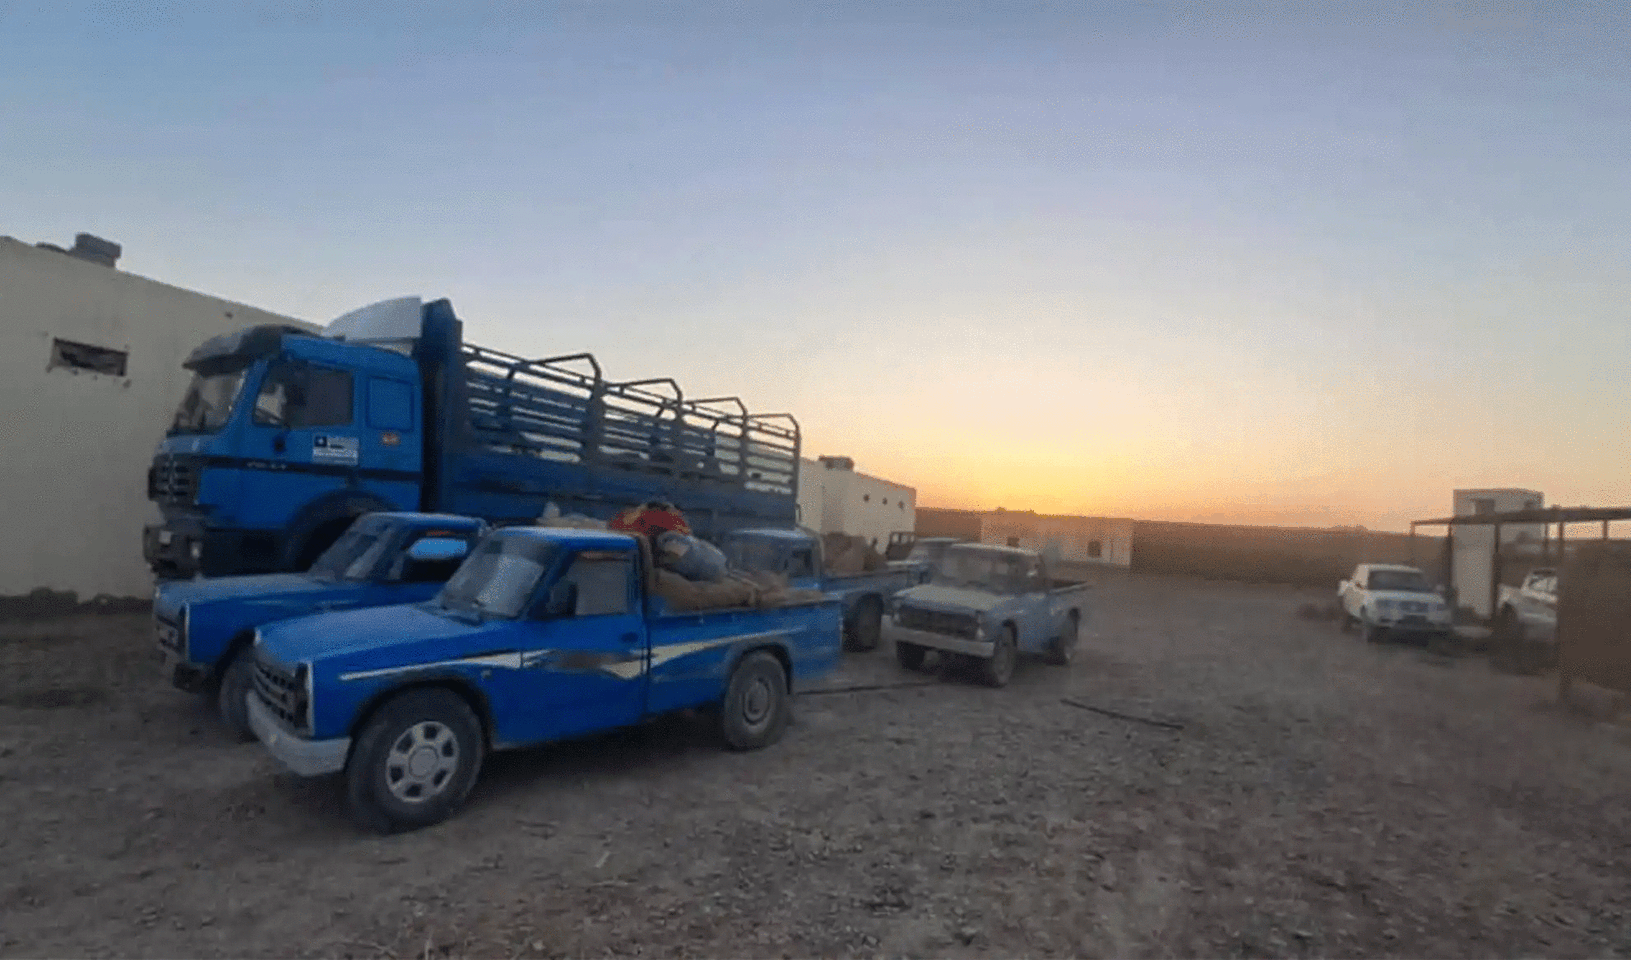 Bid to smuggle iron abroad thwarted, 6 detained in Helmand